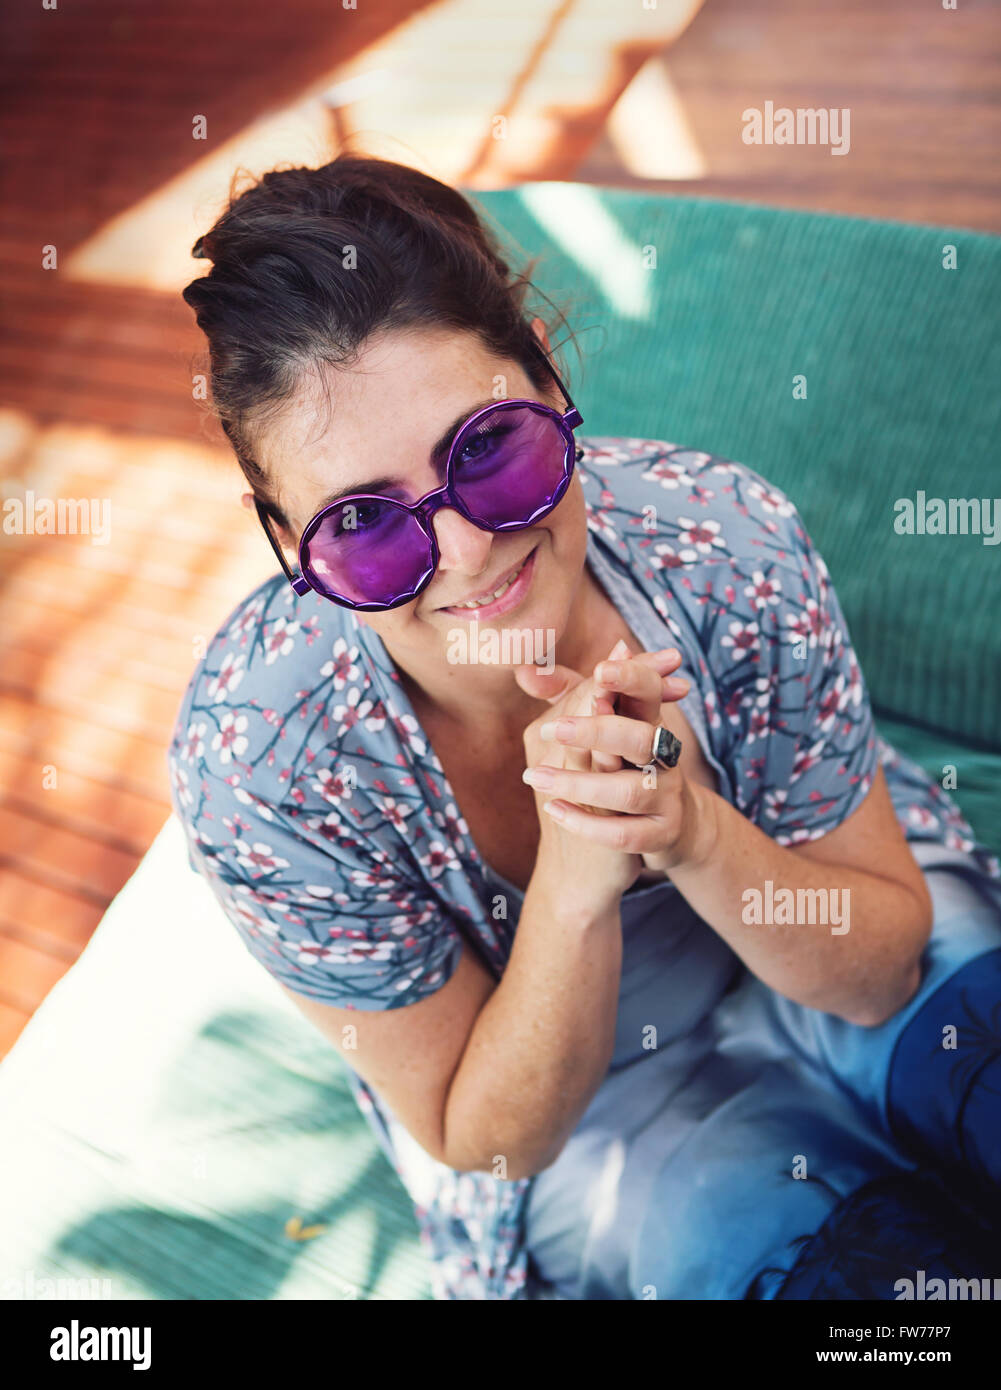 Woman in hippy purple sunglasses smiling happily at her party Stock Photo